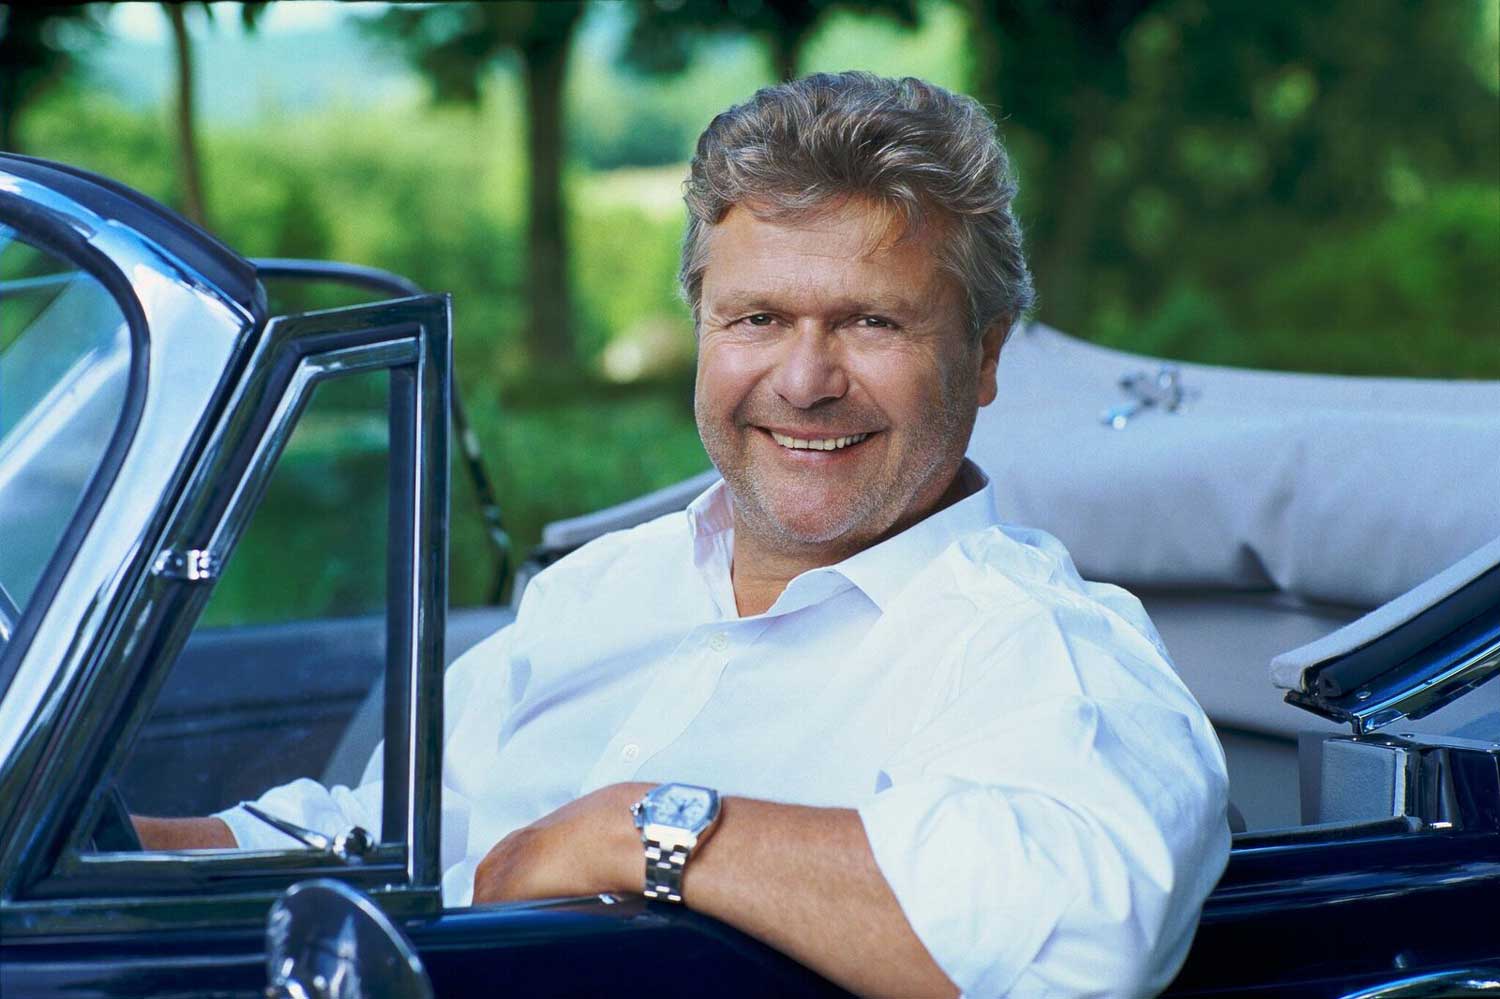 Alain-Dominique Perrin, Cartier’s CEO from 1975 to 1998, who oversaw a period of extraordinary creativity for the maison (Image: theconnectedtable.com)